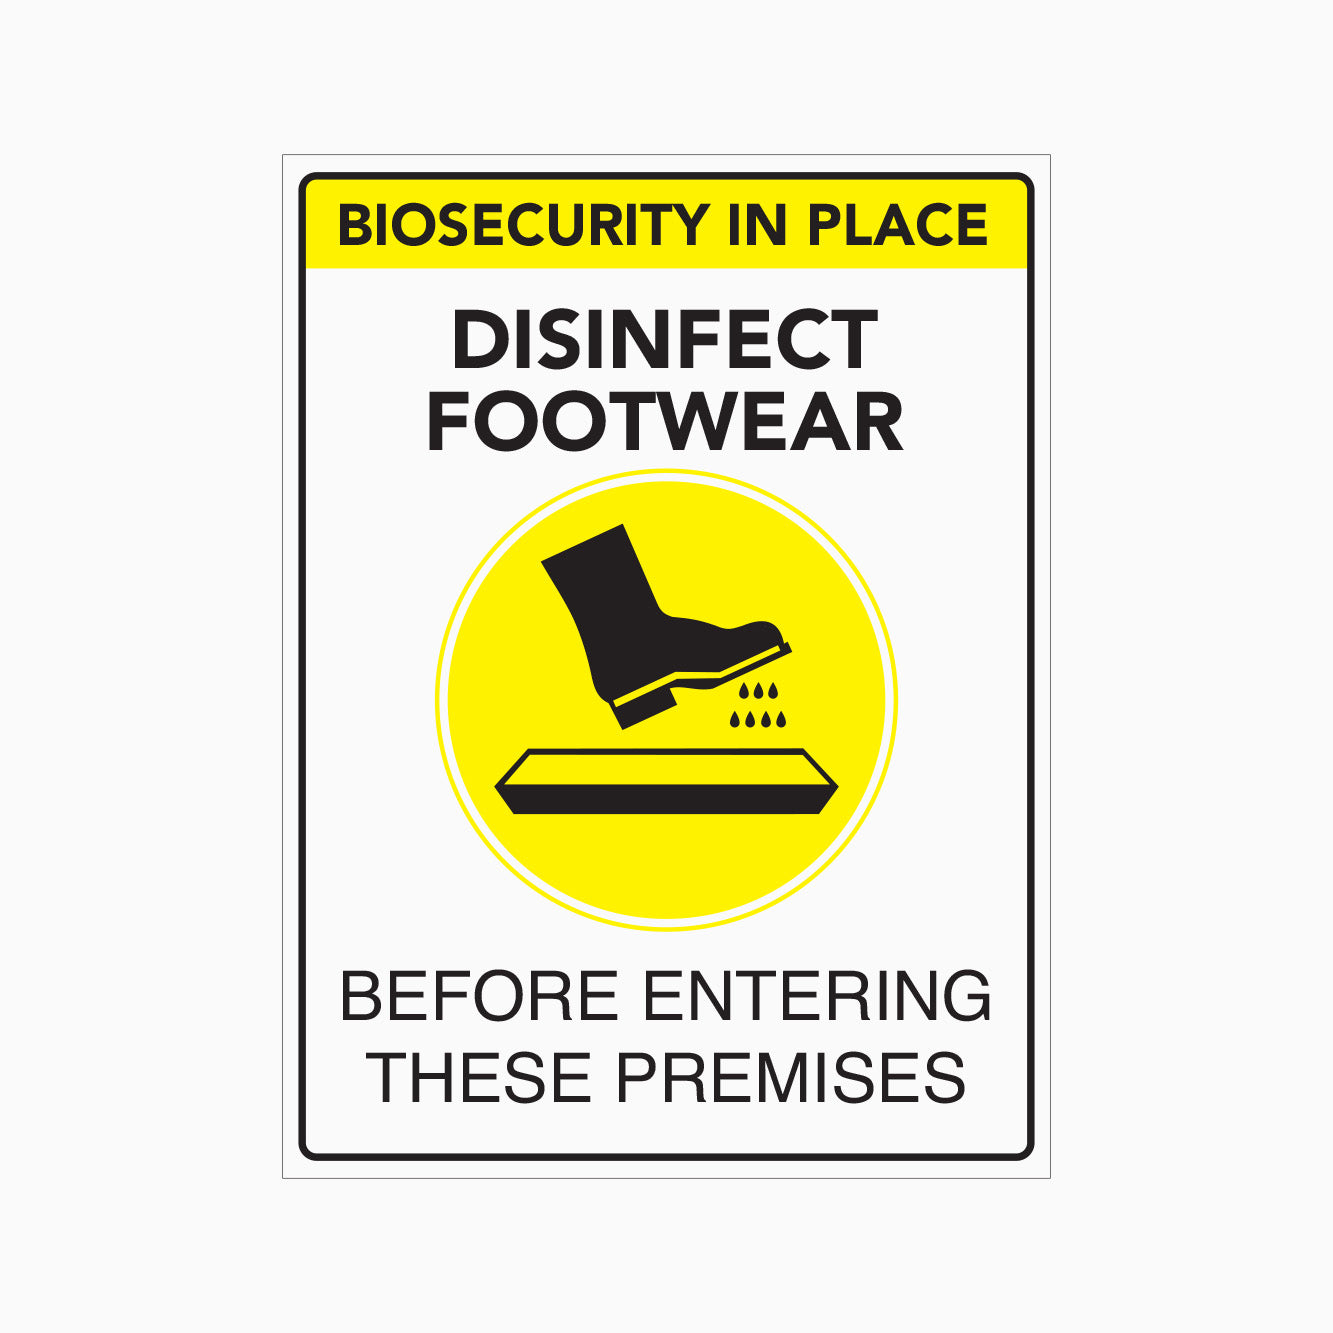 BIOSECURITY IN PLACE DISINFECT FOOTWEAR BEFORE ENTERING THESE PREMISES SIGN